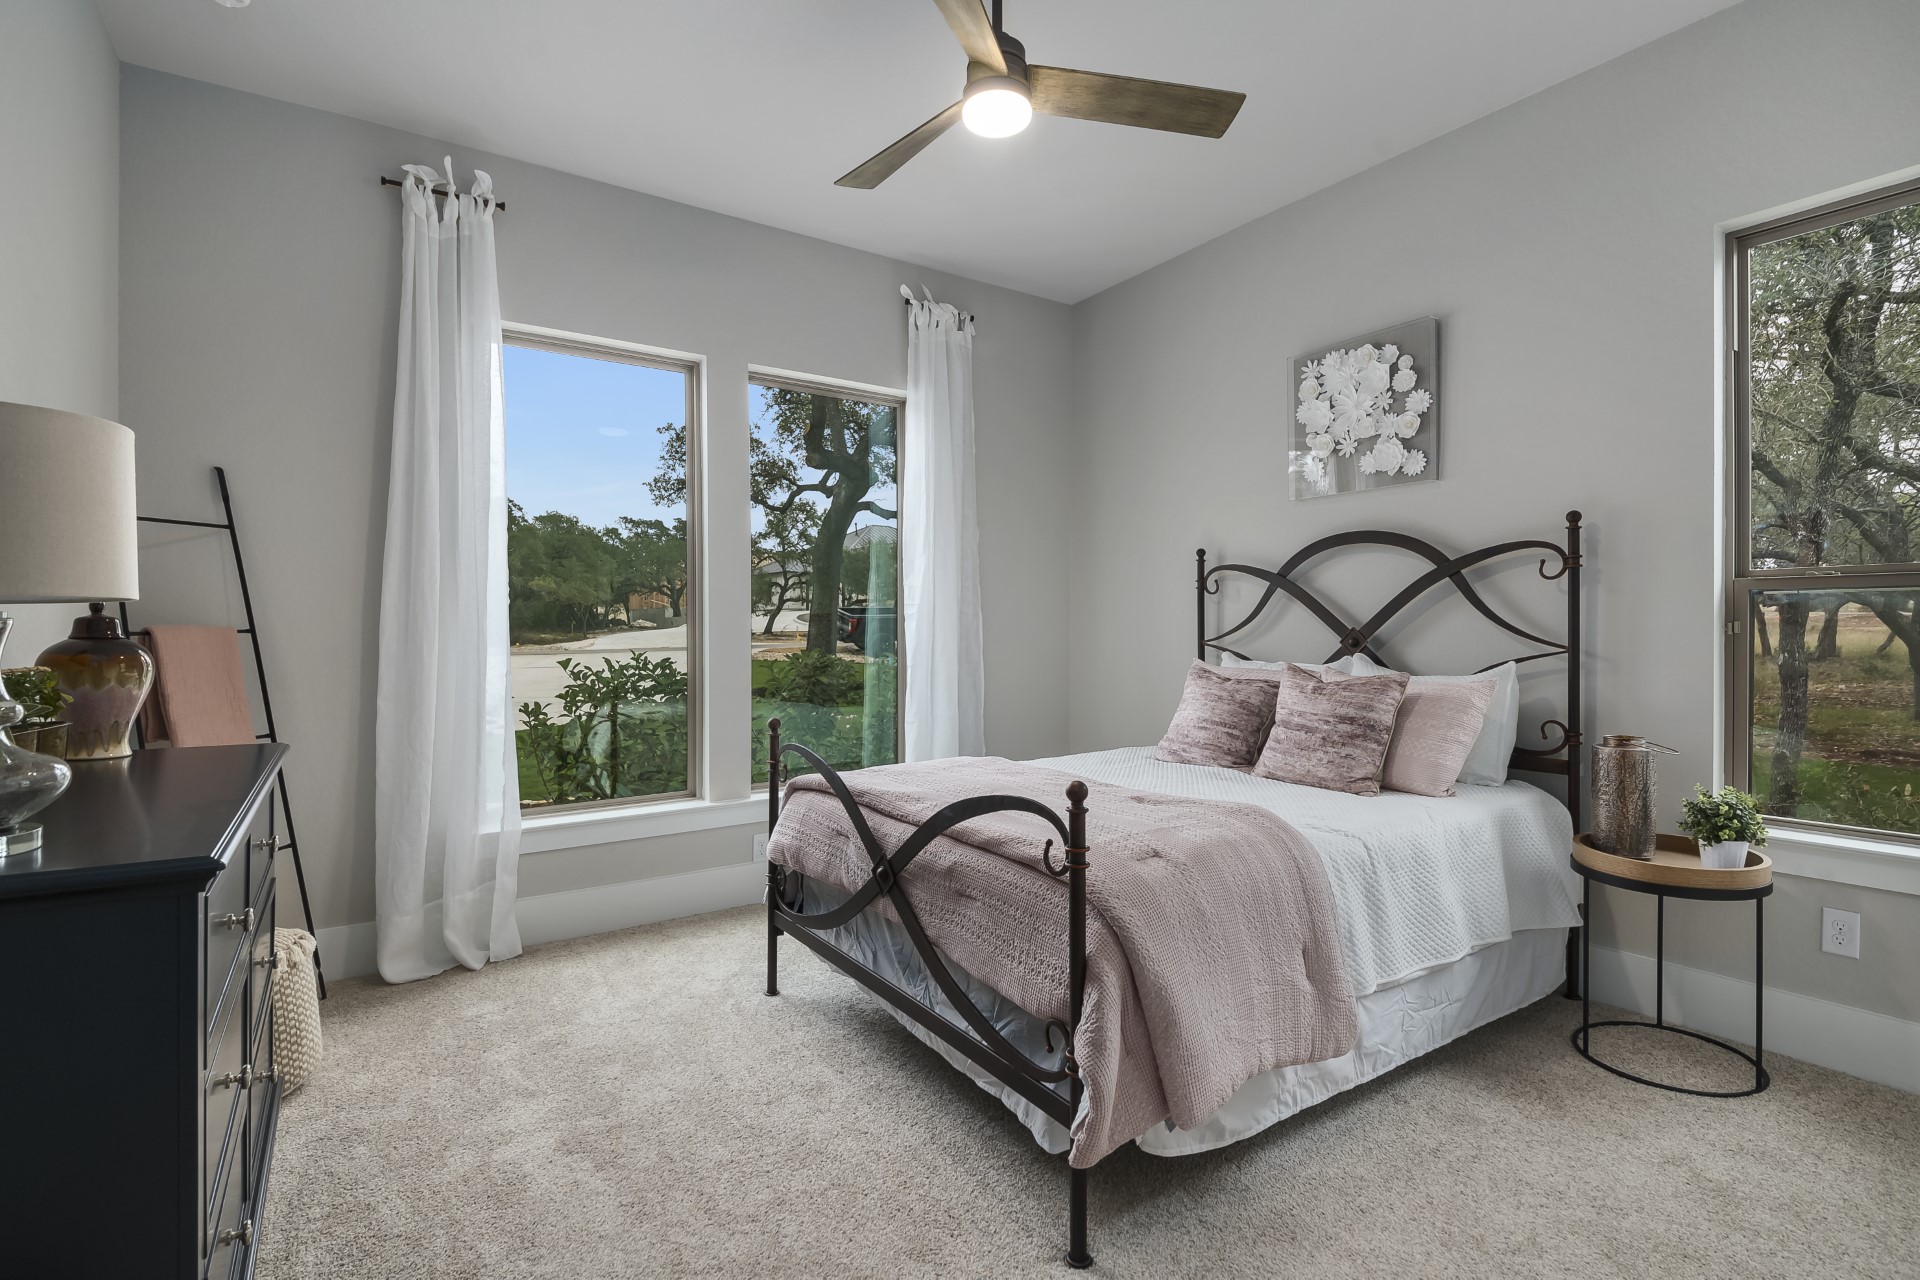 A front view of the bedroom within the Belle Oaks custom floor plan from JLP Builders